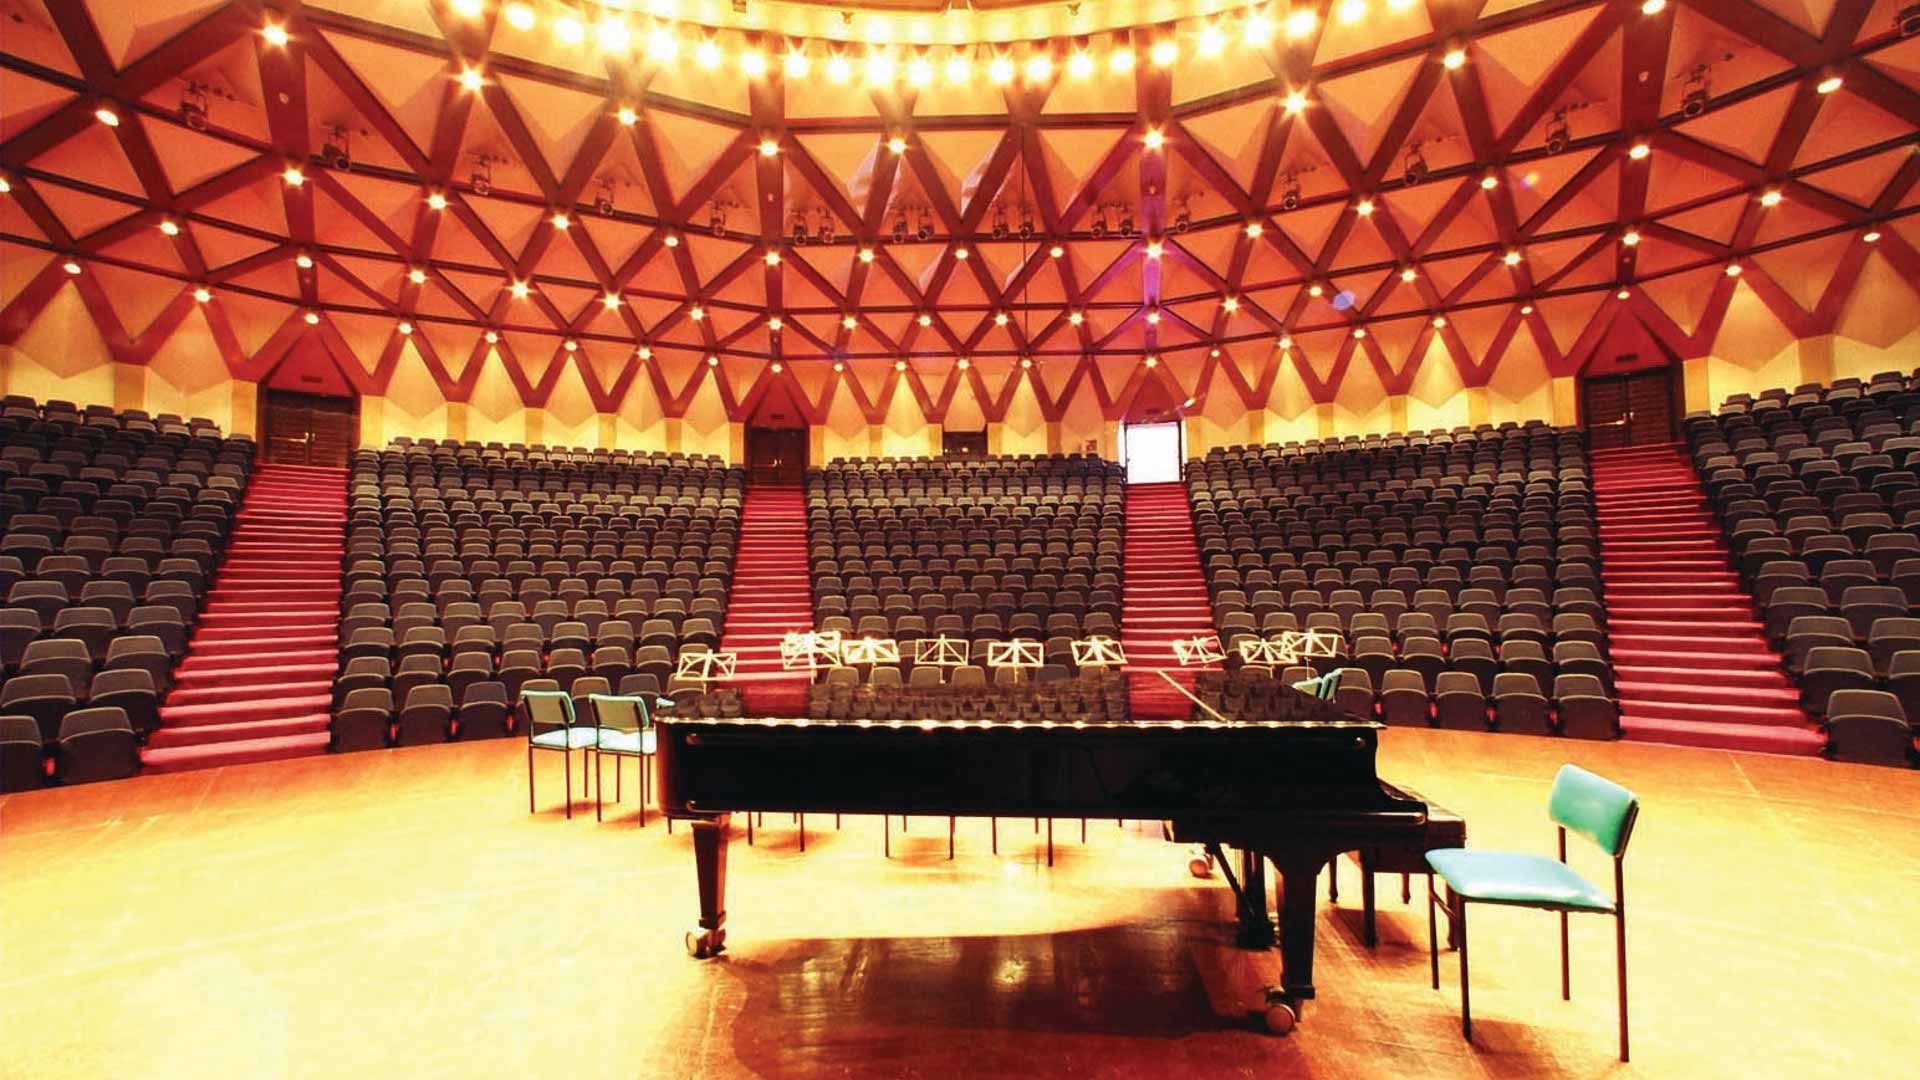 NCPA - Cultural venue near 3-star hotel in South Mumbai, hosting captivating performances and enriching artistic experiences